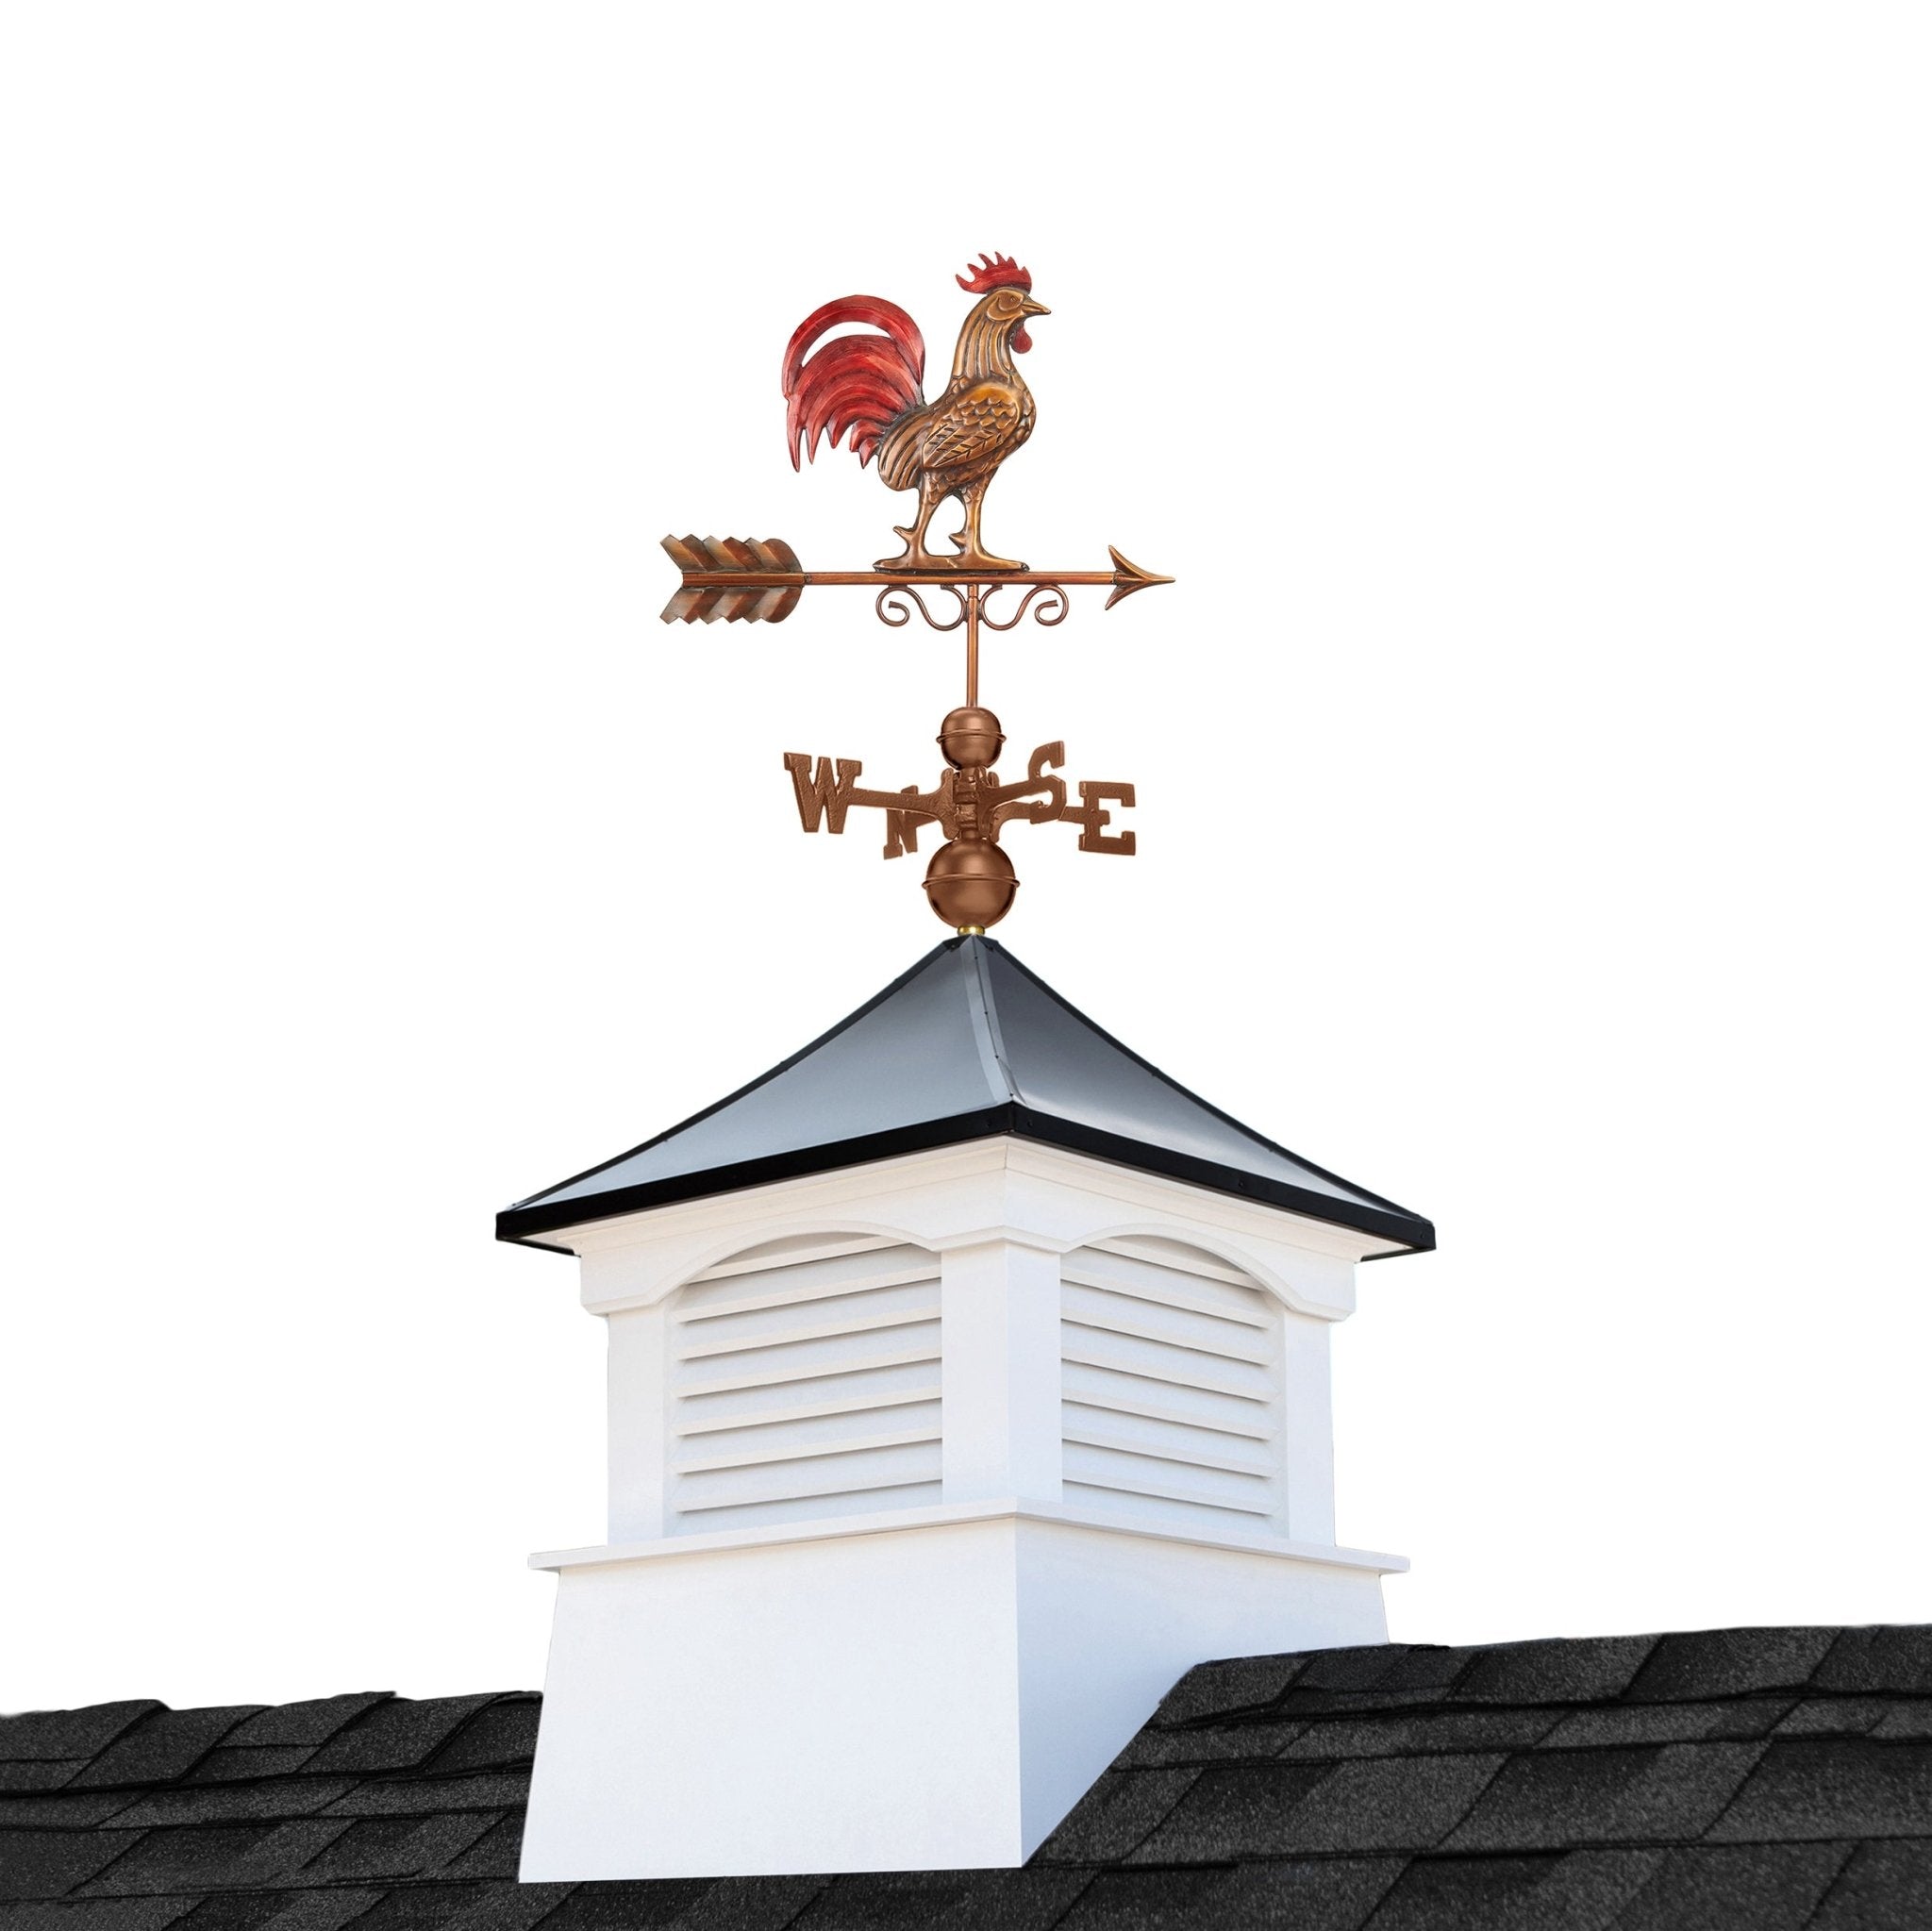 26" Square Coventry Vinyl Cupola with Black Aluminum Roof and Red Rooster Weathervane by Good Directions - Good Directions